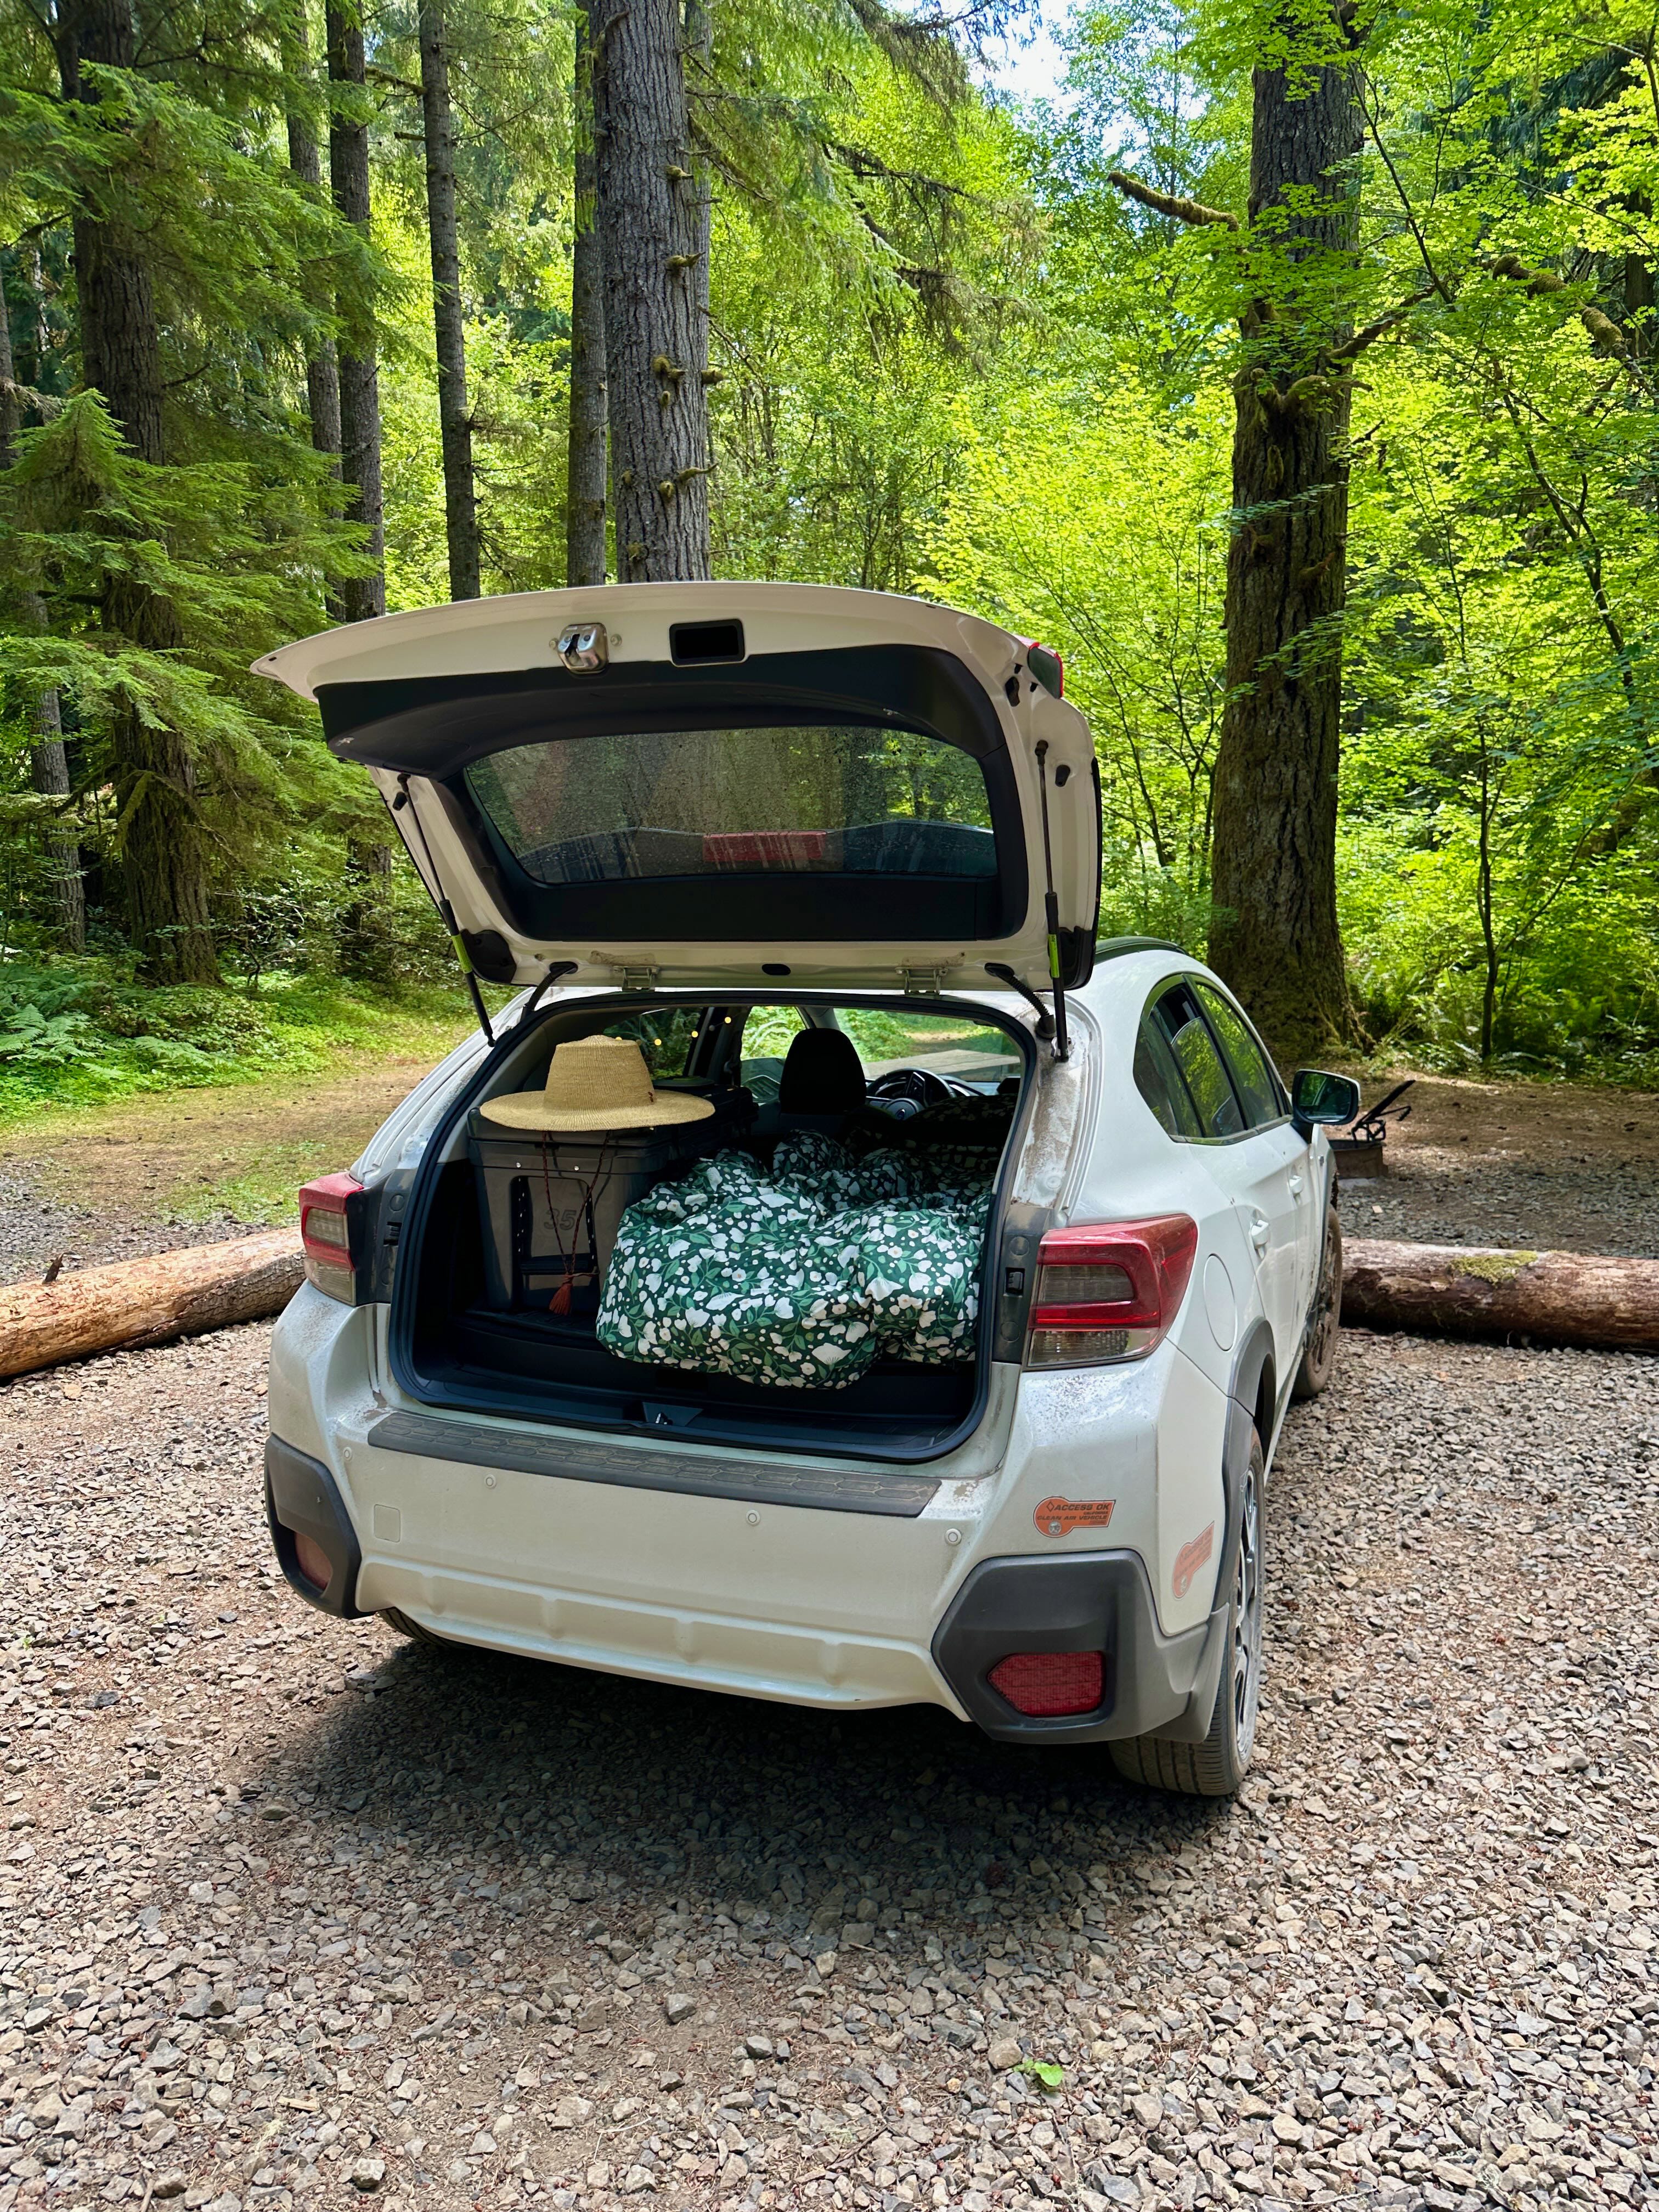 Issue #103: A Complete Guide to (Solo) Car Camping